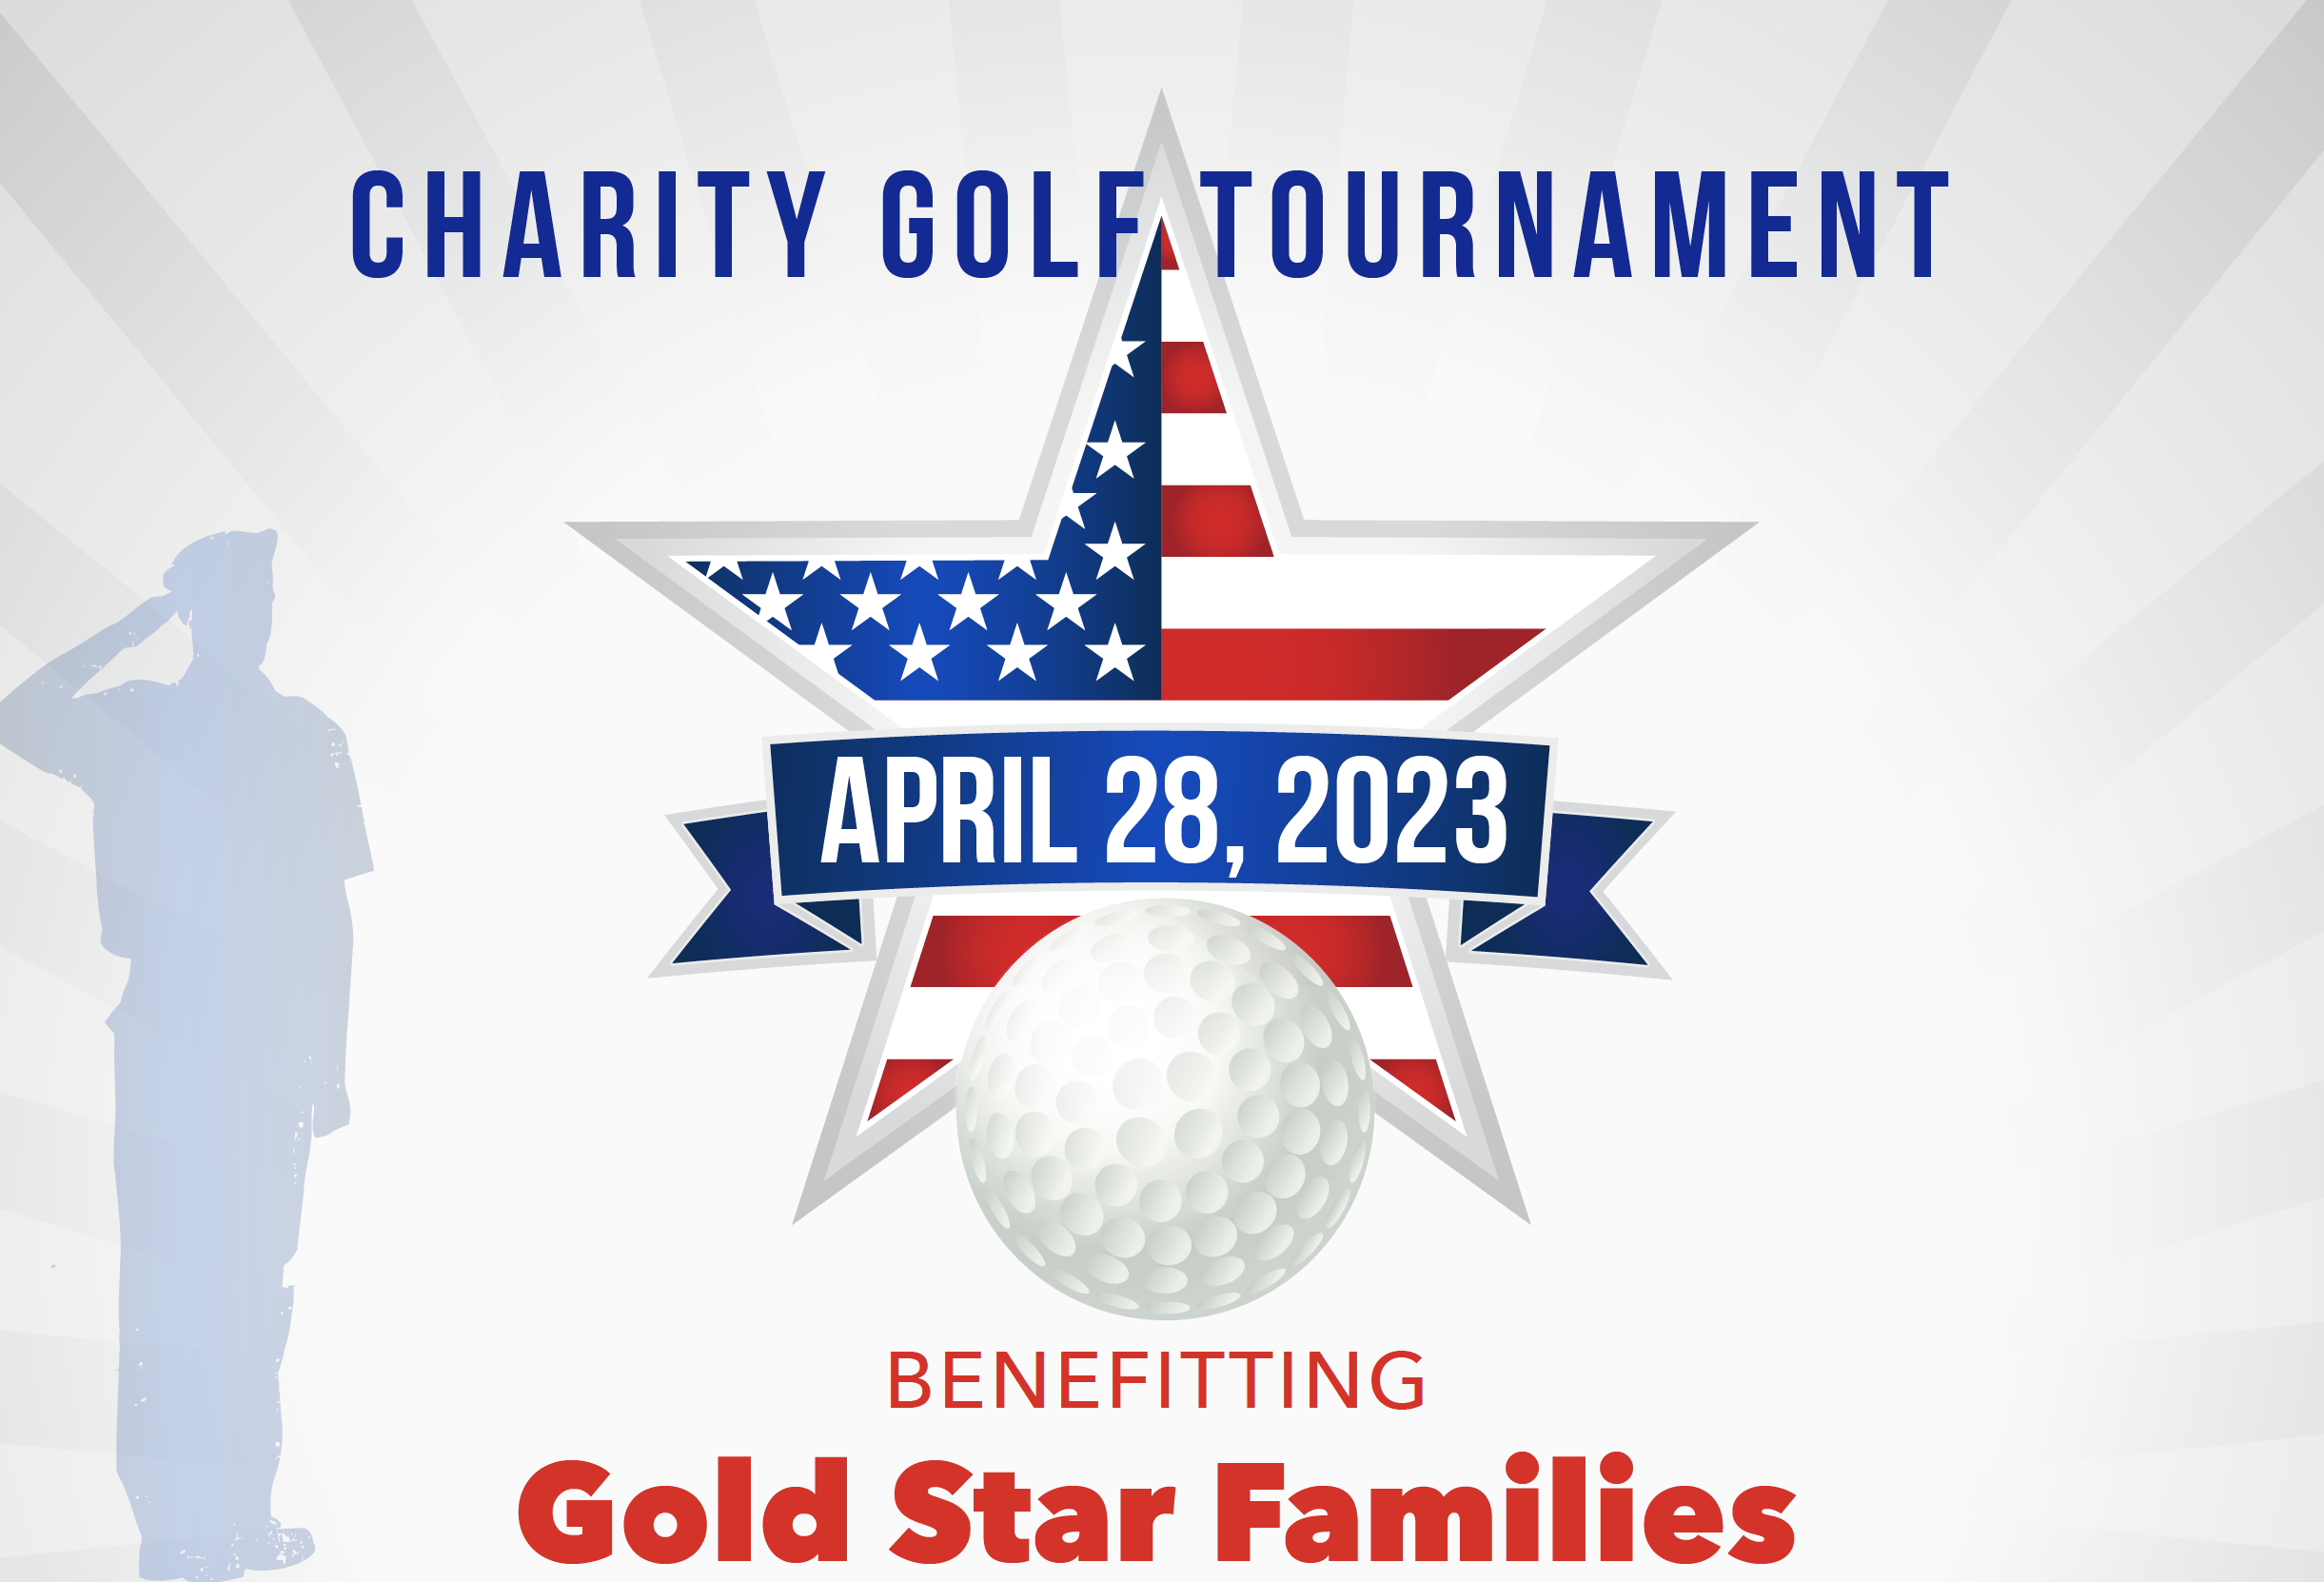 Inaugural Gold Star Family Charity Golf Tournament